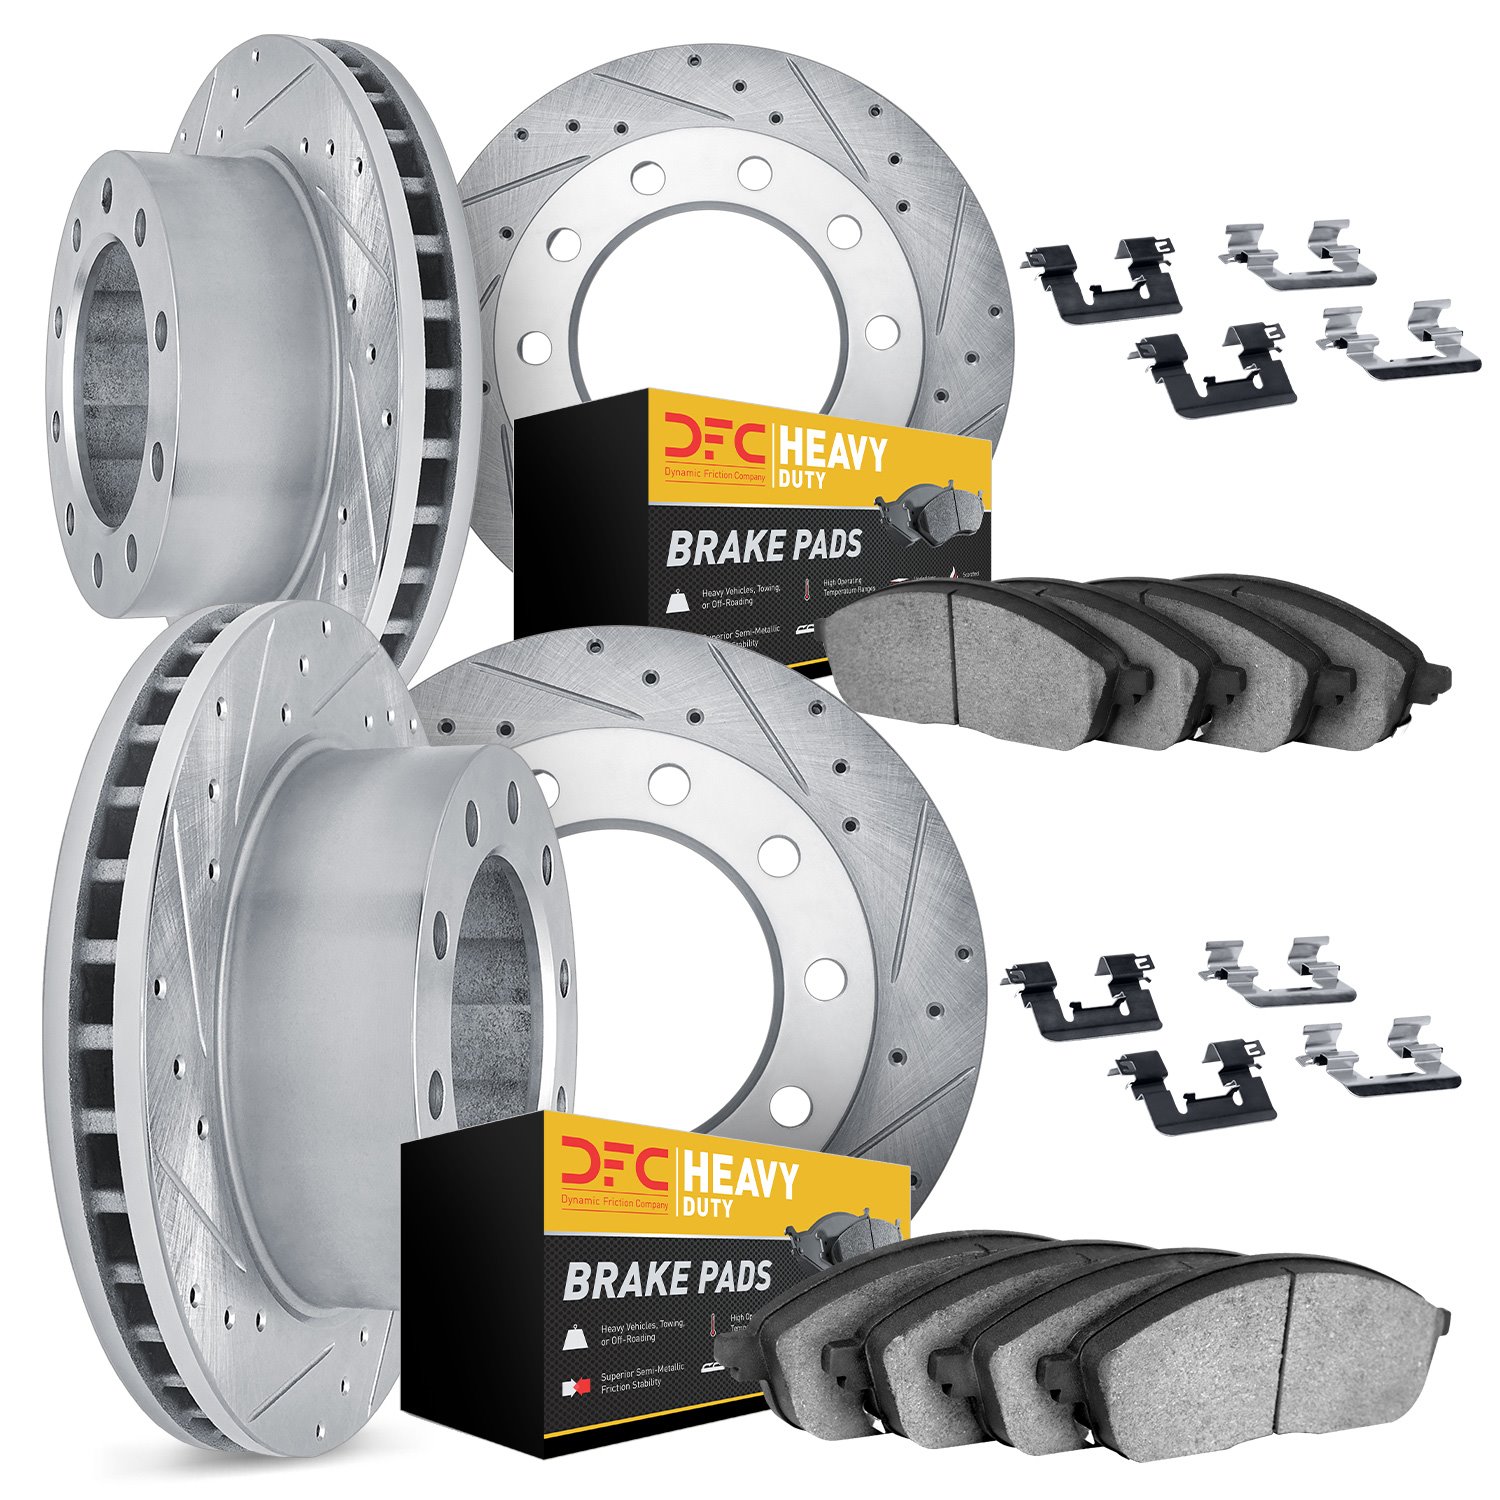 7214-99044 Drilled/Slotted Rotors w/Heavy-Duty Brake Pads Kit & Hardware [Silver], 1999-2004 Ford/Lincoln/Mercury/Mazda, Positio